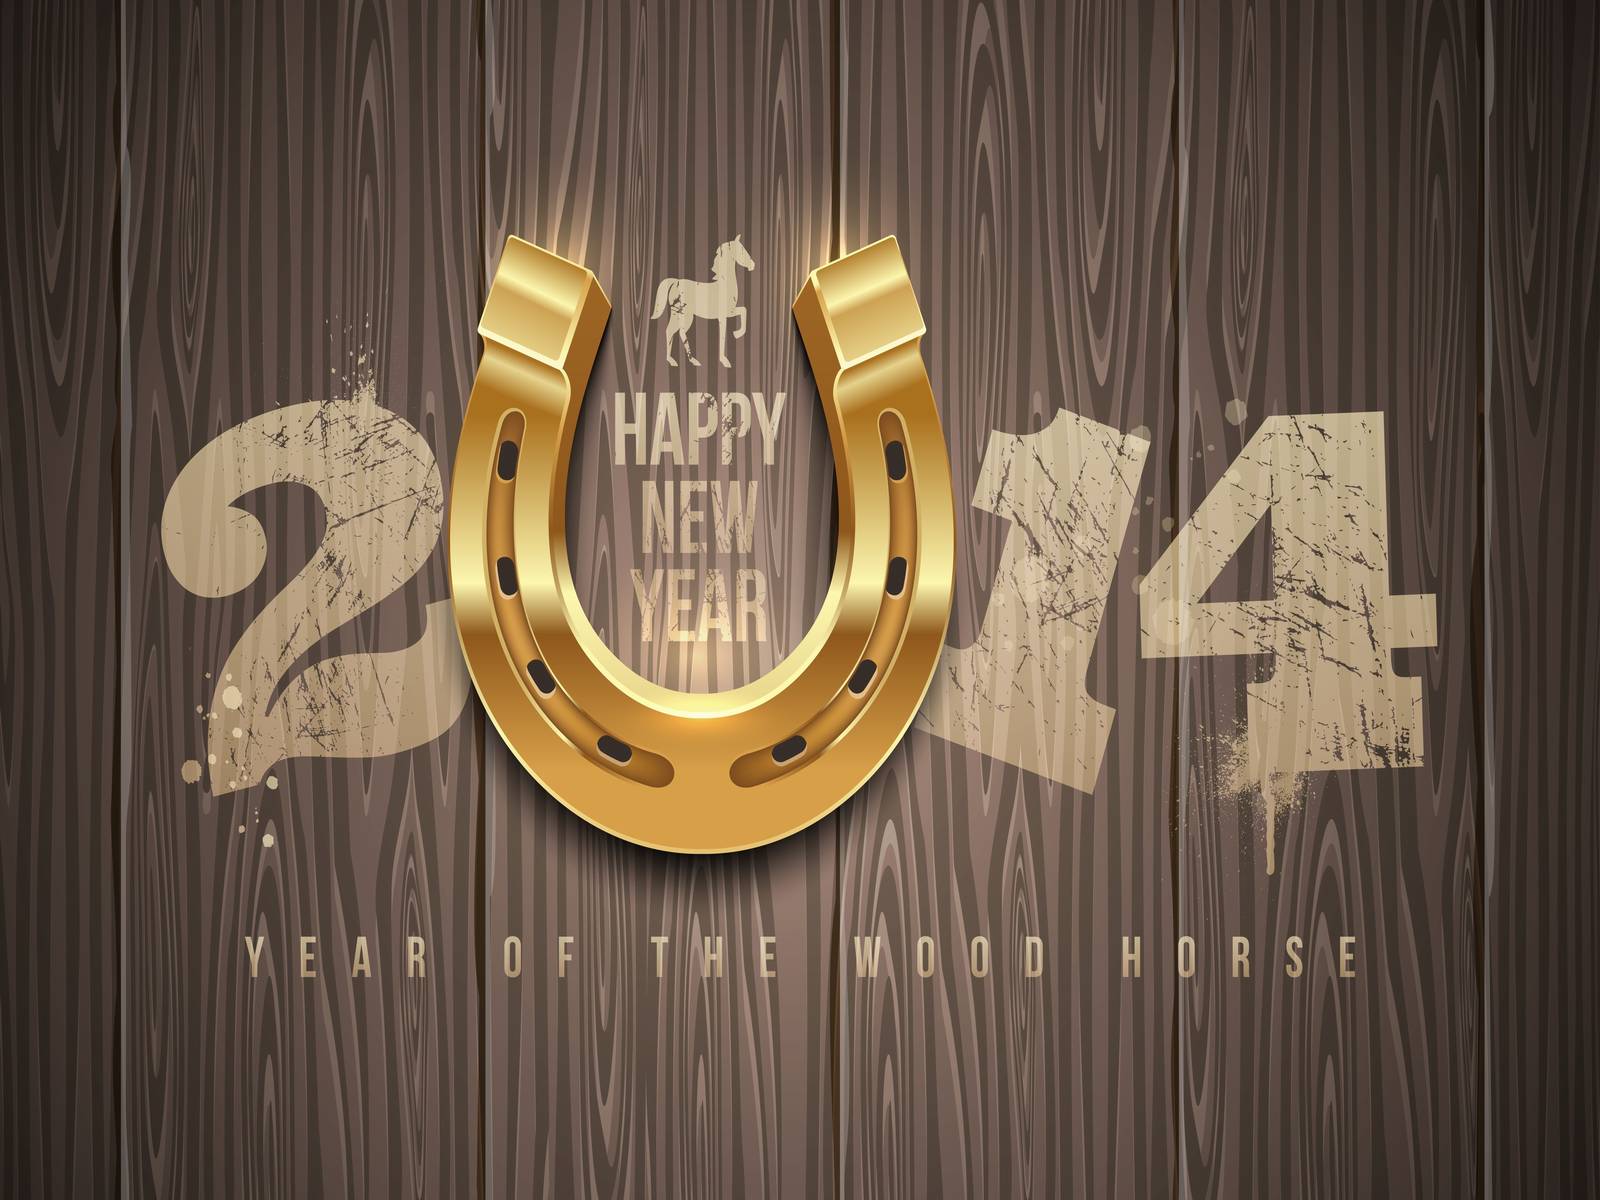 New Year Wallpaper 2014 - 12 Free Wallpapers For 2014 Happy New Year